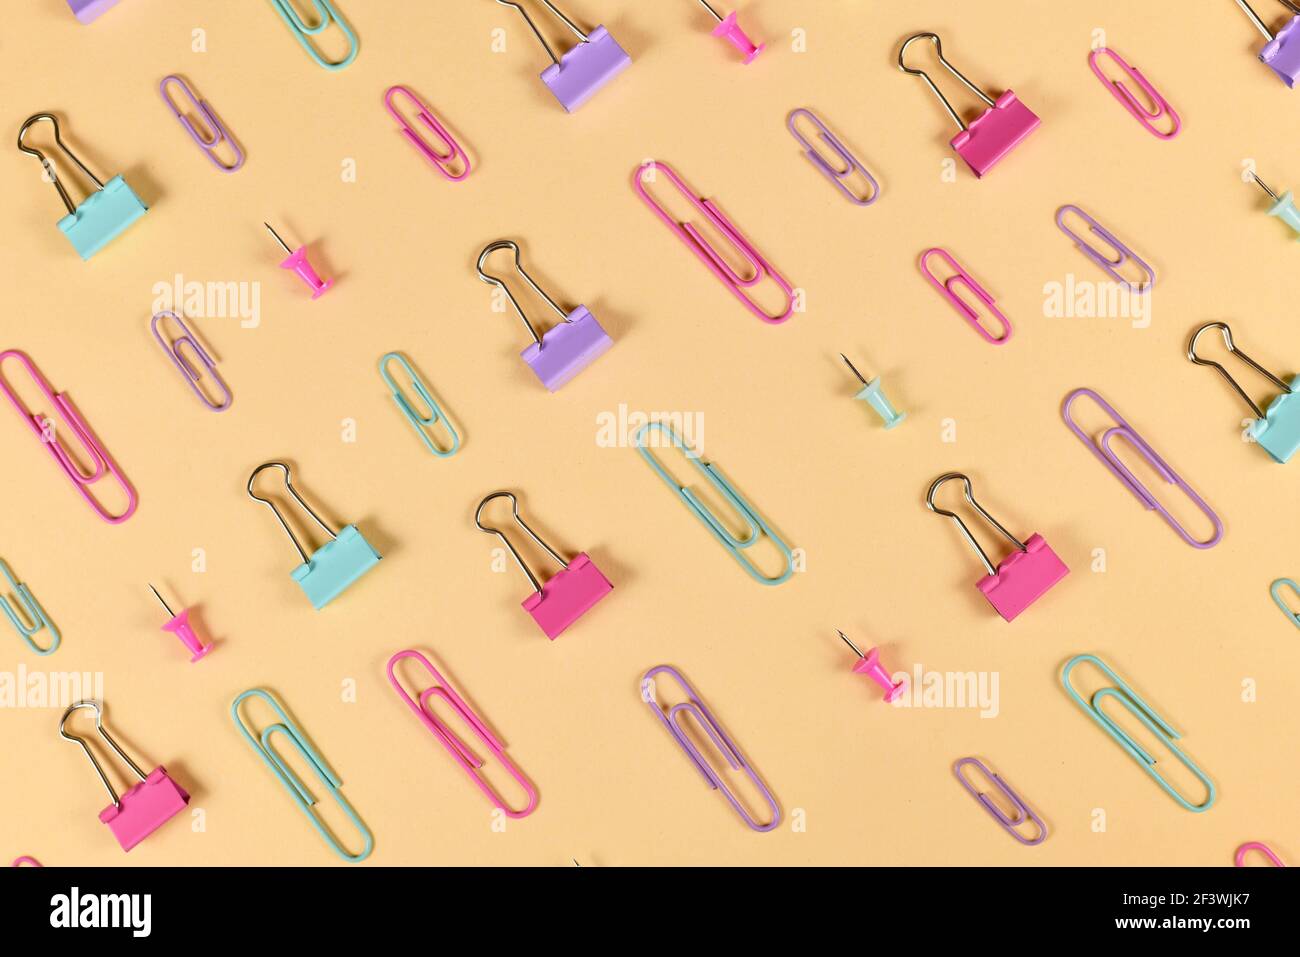 Stationery items like paper clips and drawing pins arranged on side of yellow background Stock Photo